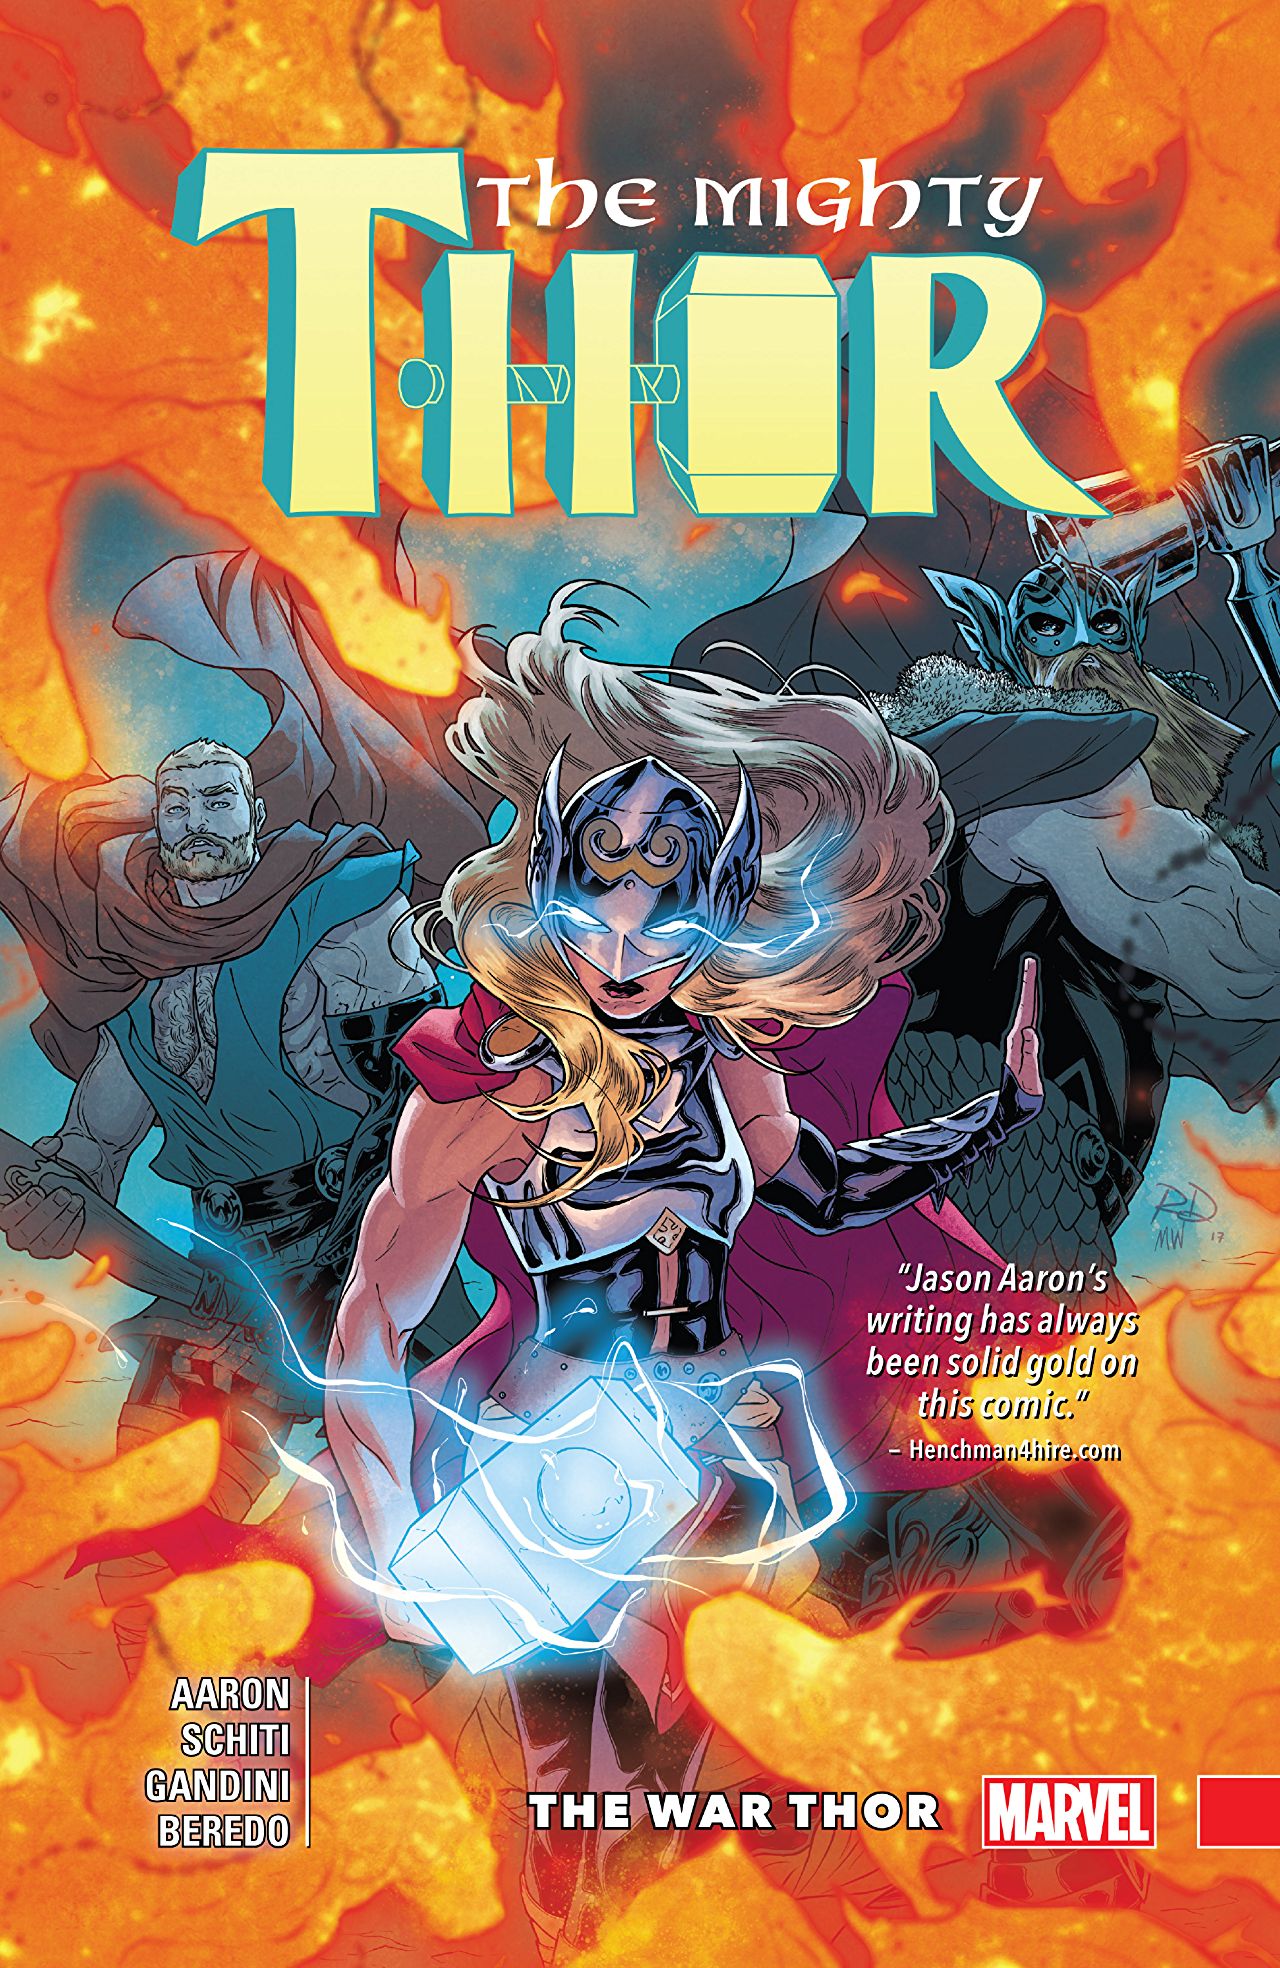 'The Mighty Thor Vol. 4: The War Thor' continues one of the best ever stories involving Asgard and its pantheon